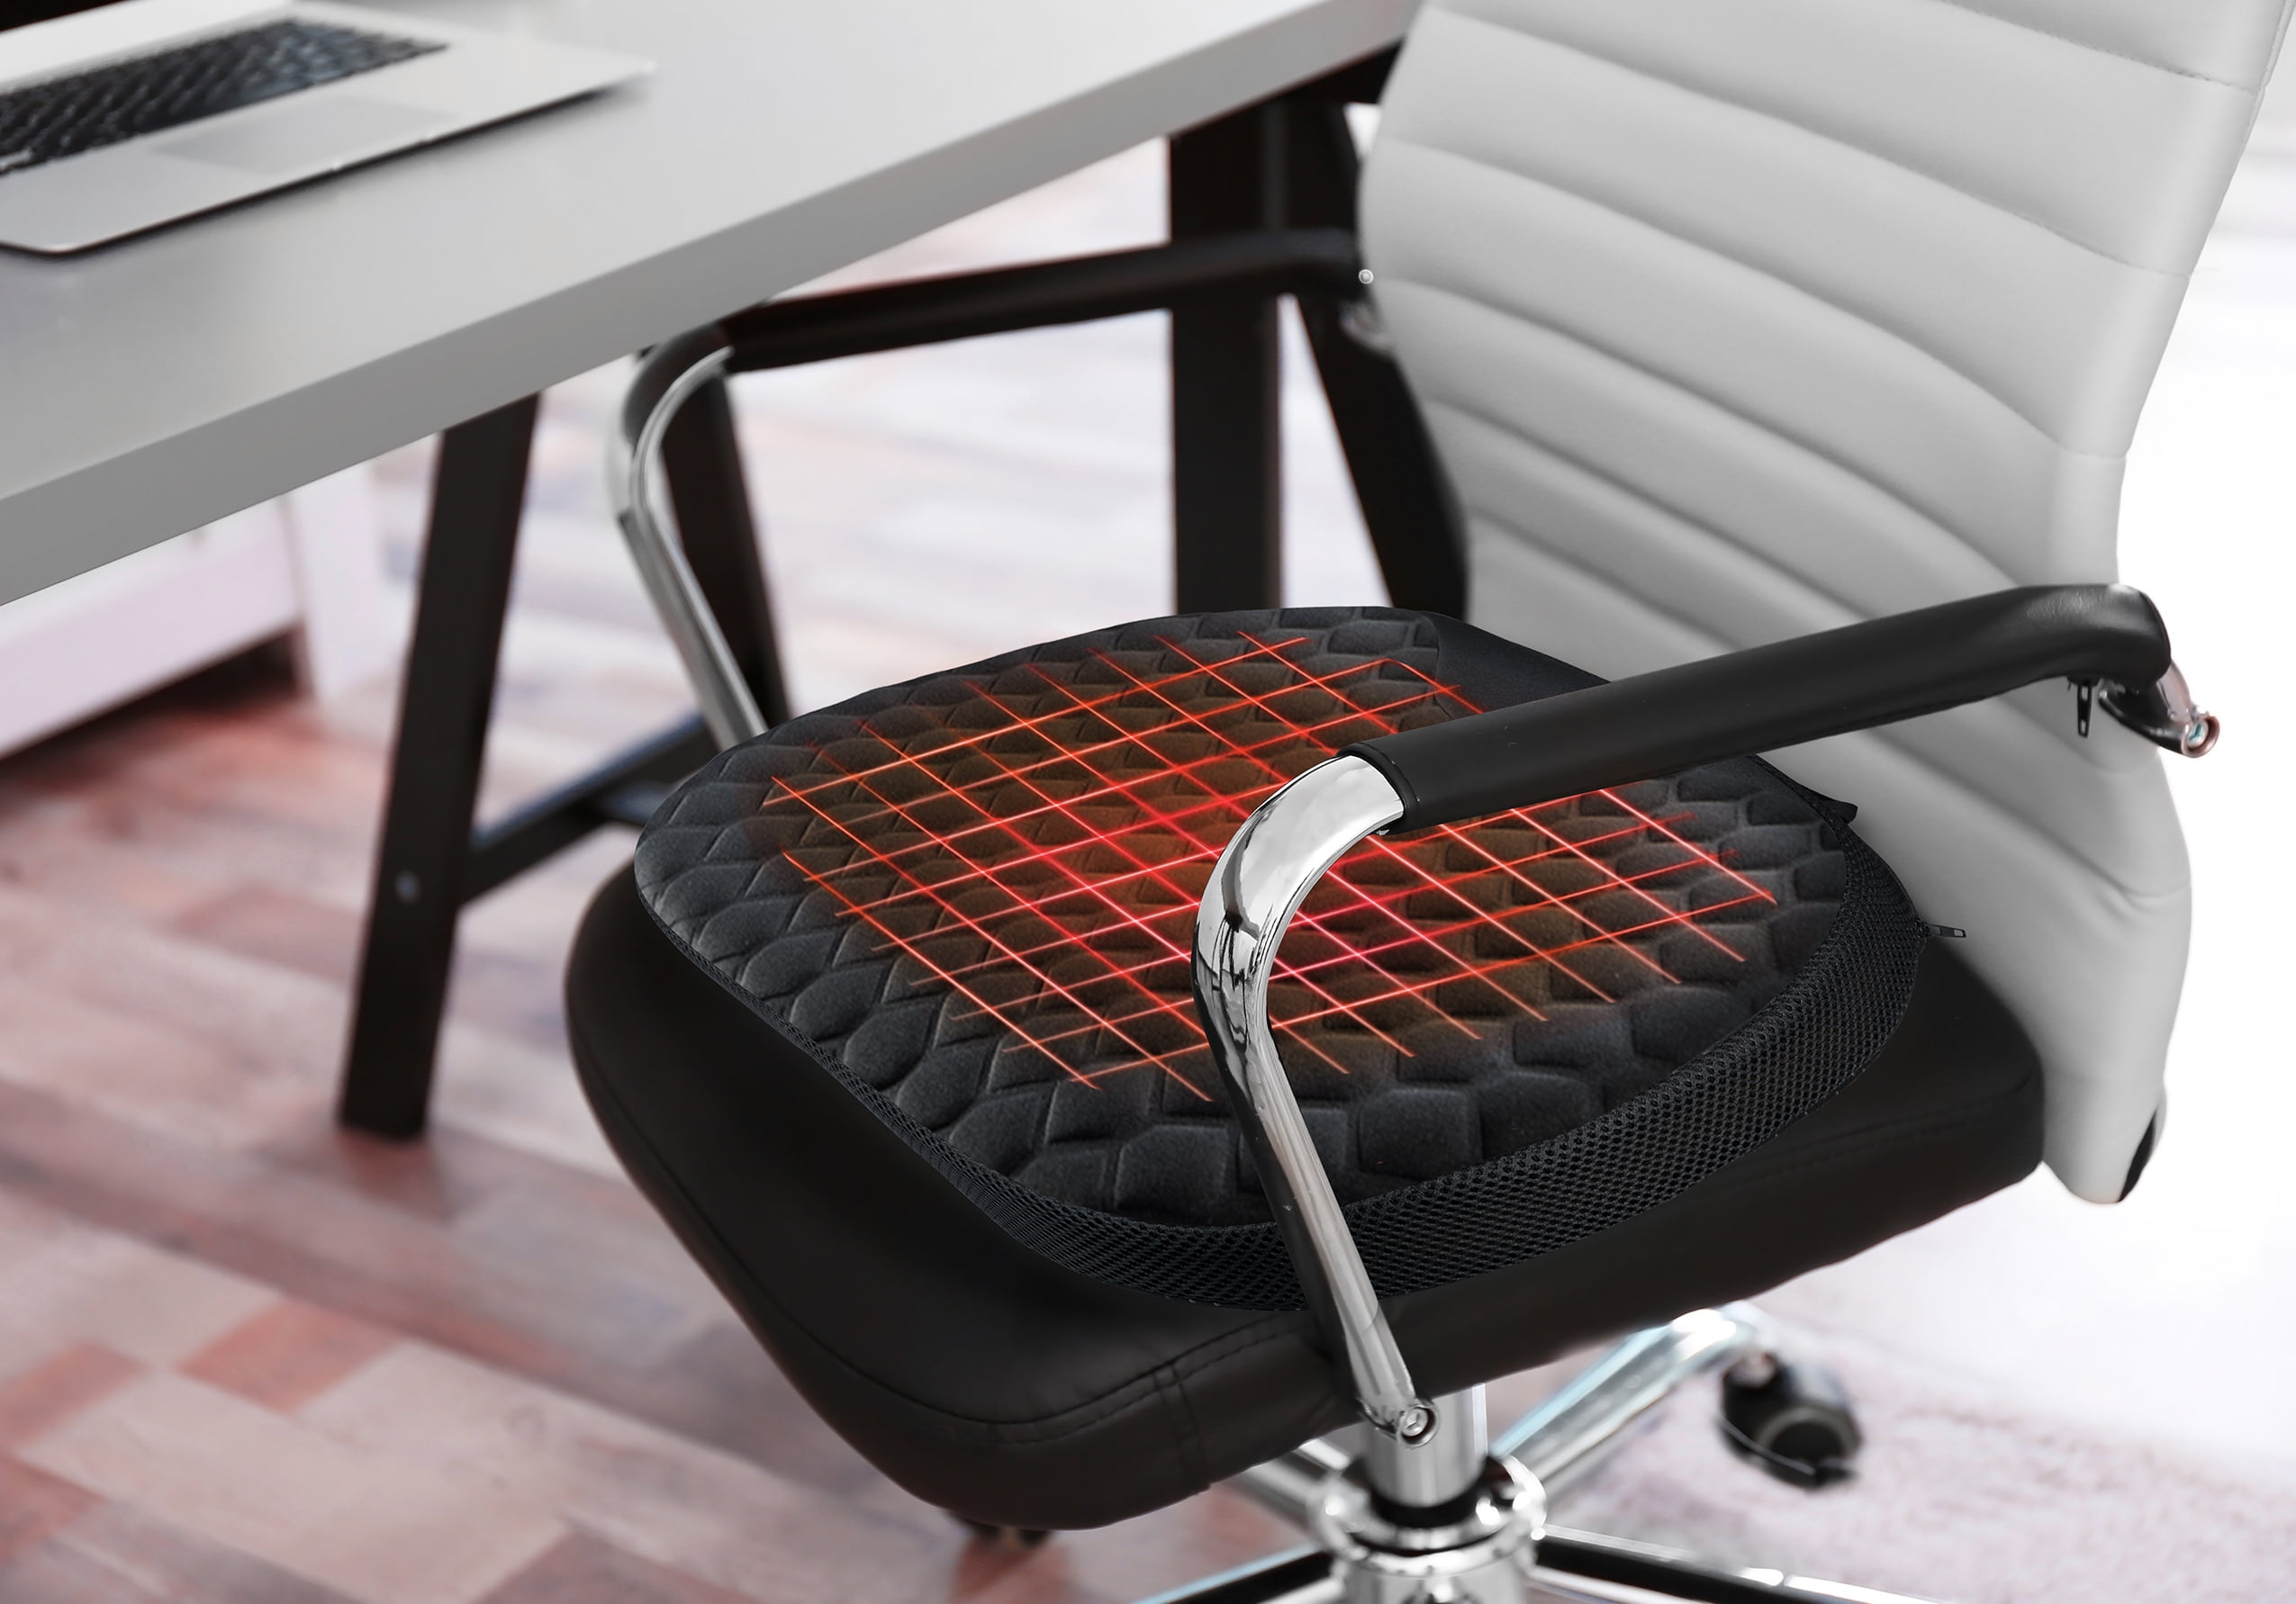 TYPE S Infused Gel Seat Cushion with Anti-Bacterial Technology